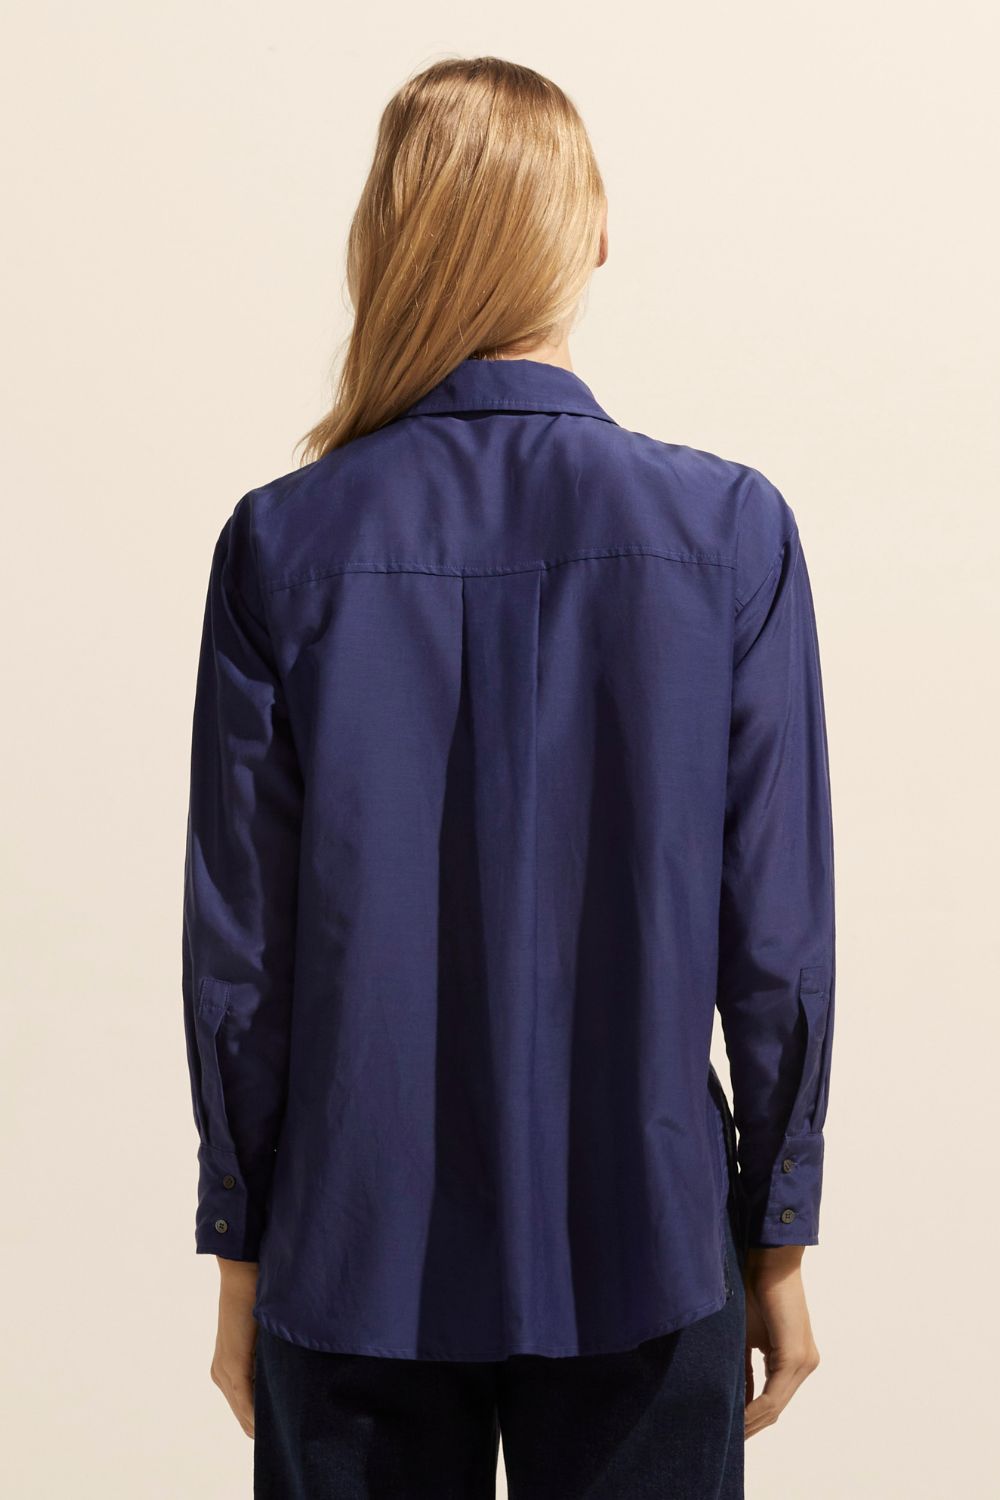 blue, shirt, long-sleeve, button-up shirt, collar, front patch pockets, side splits, back image